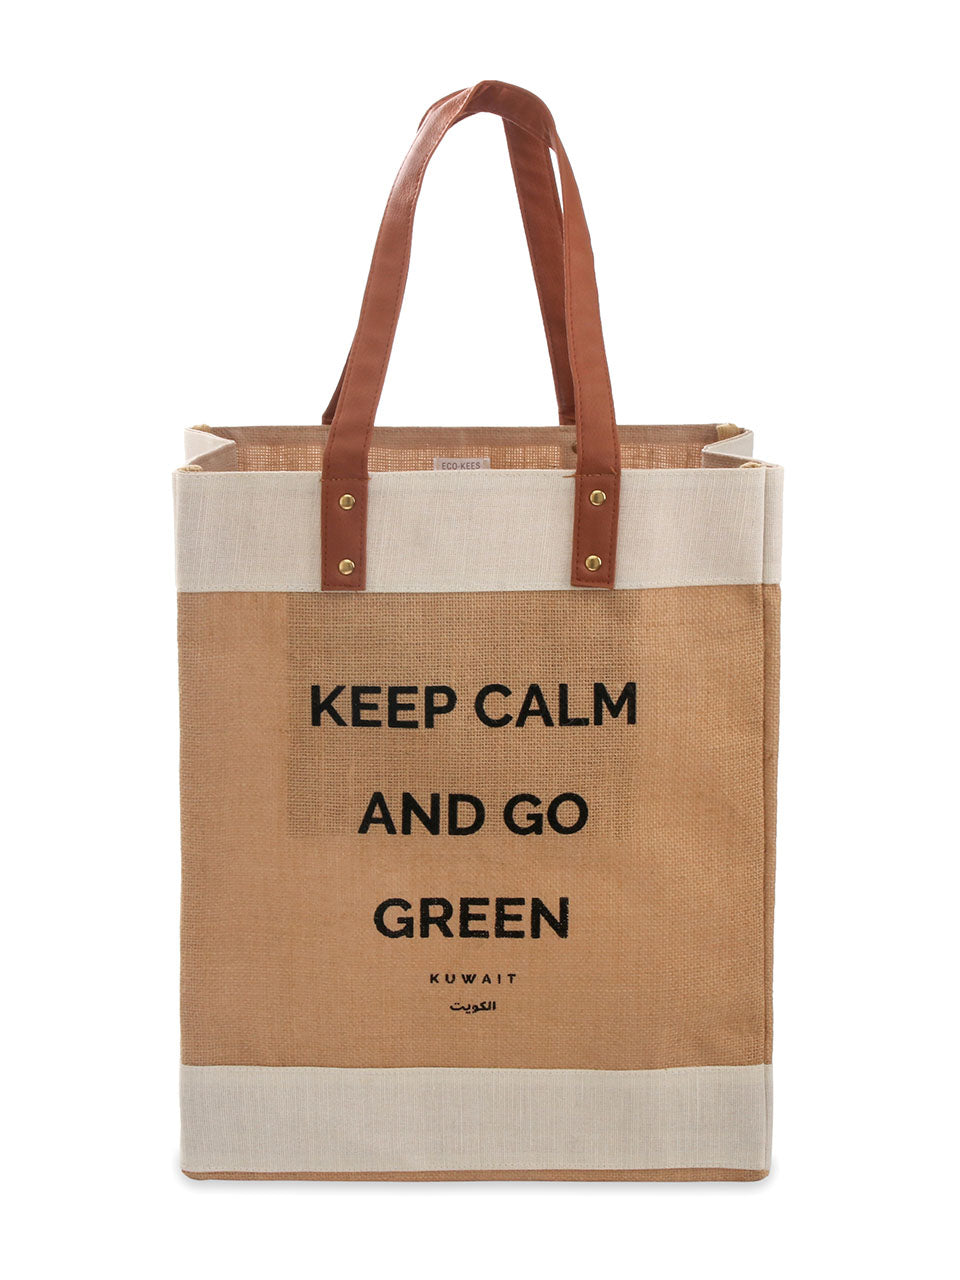 EcoKees - Natural Tote “KEEP CALM AND GO GREEN” - Eco-Kees Kuwait